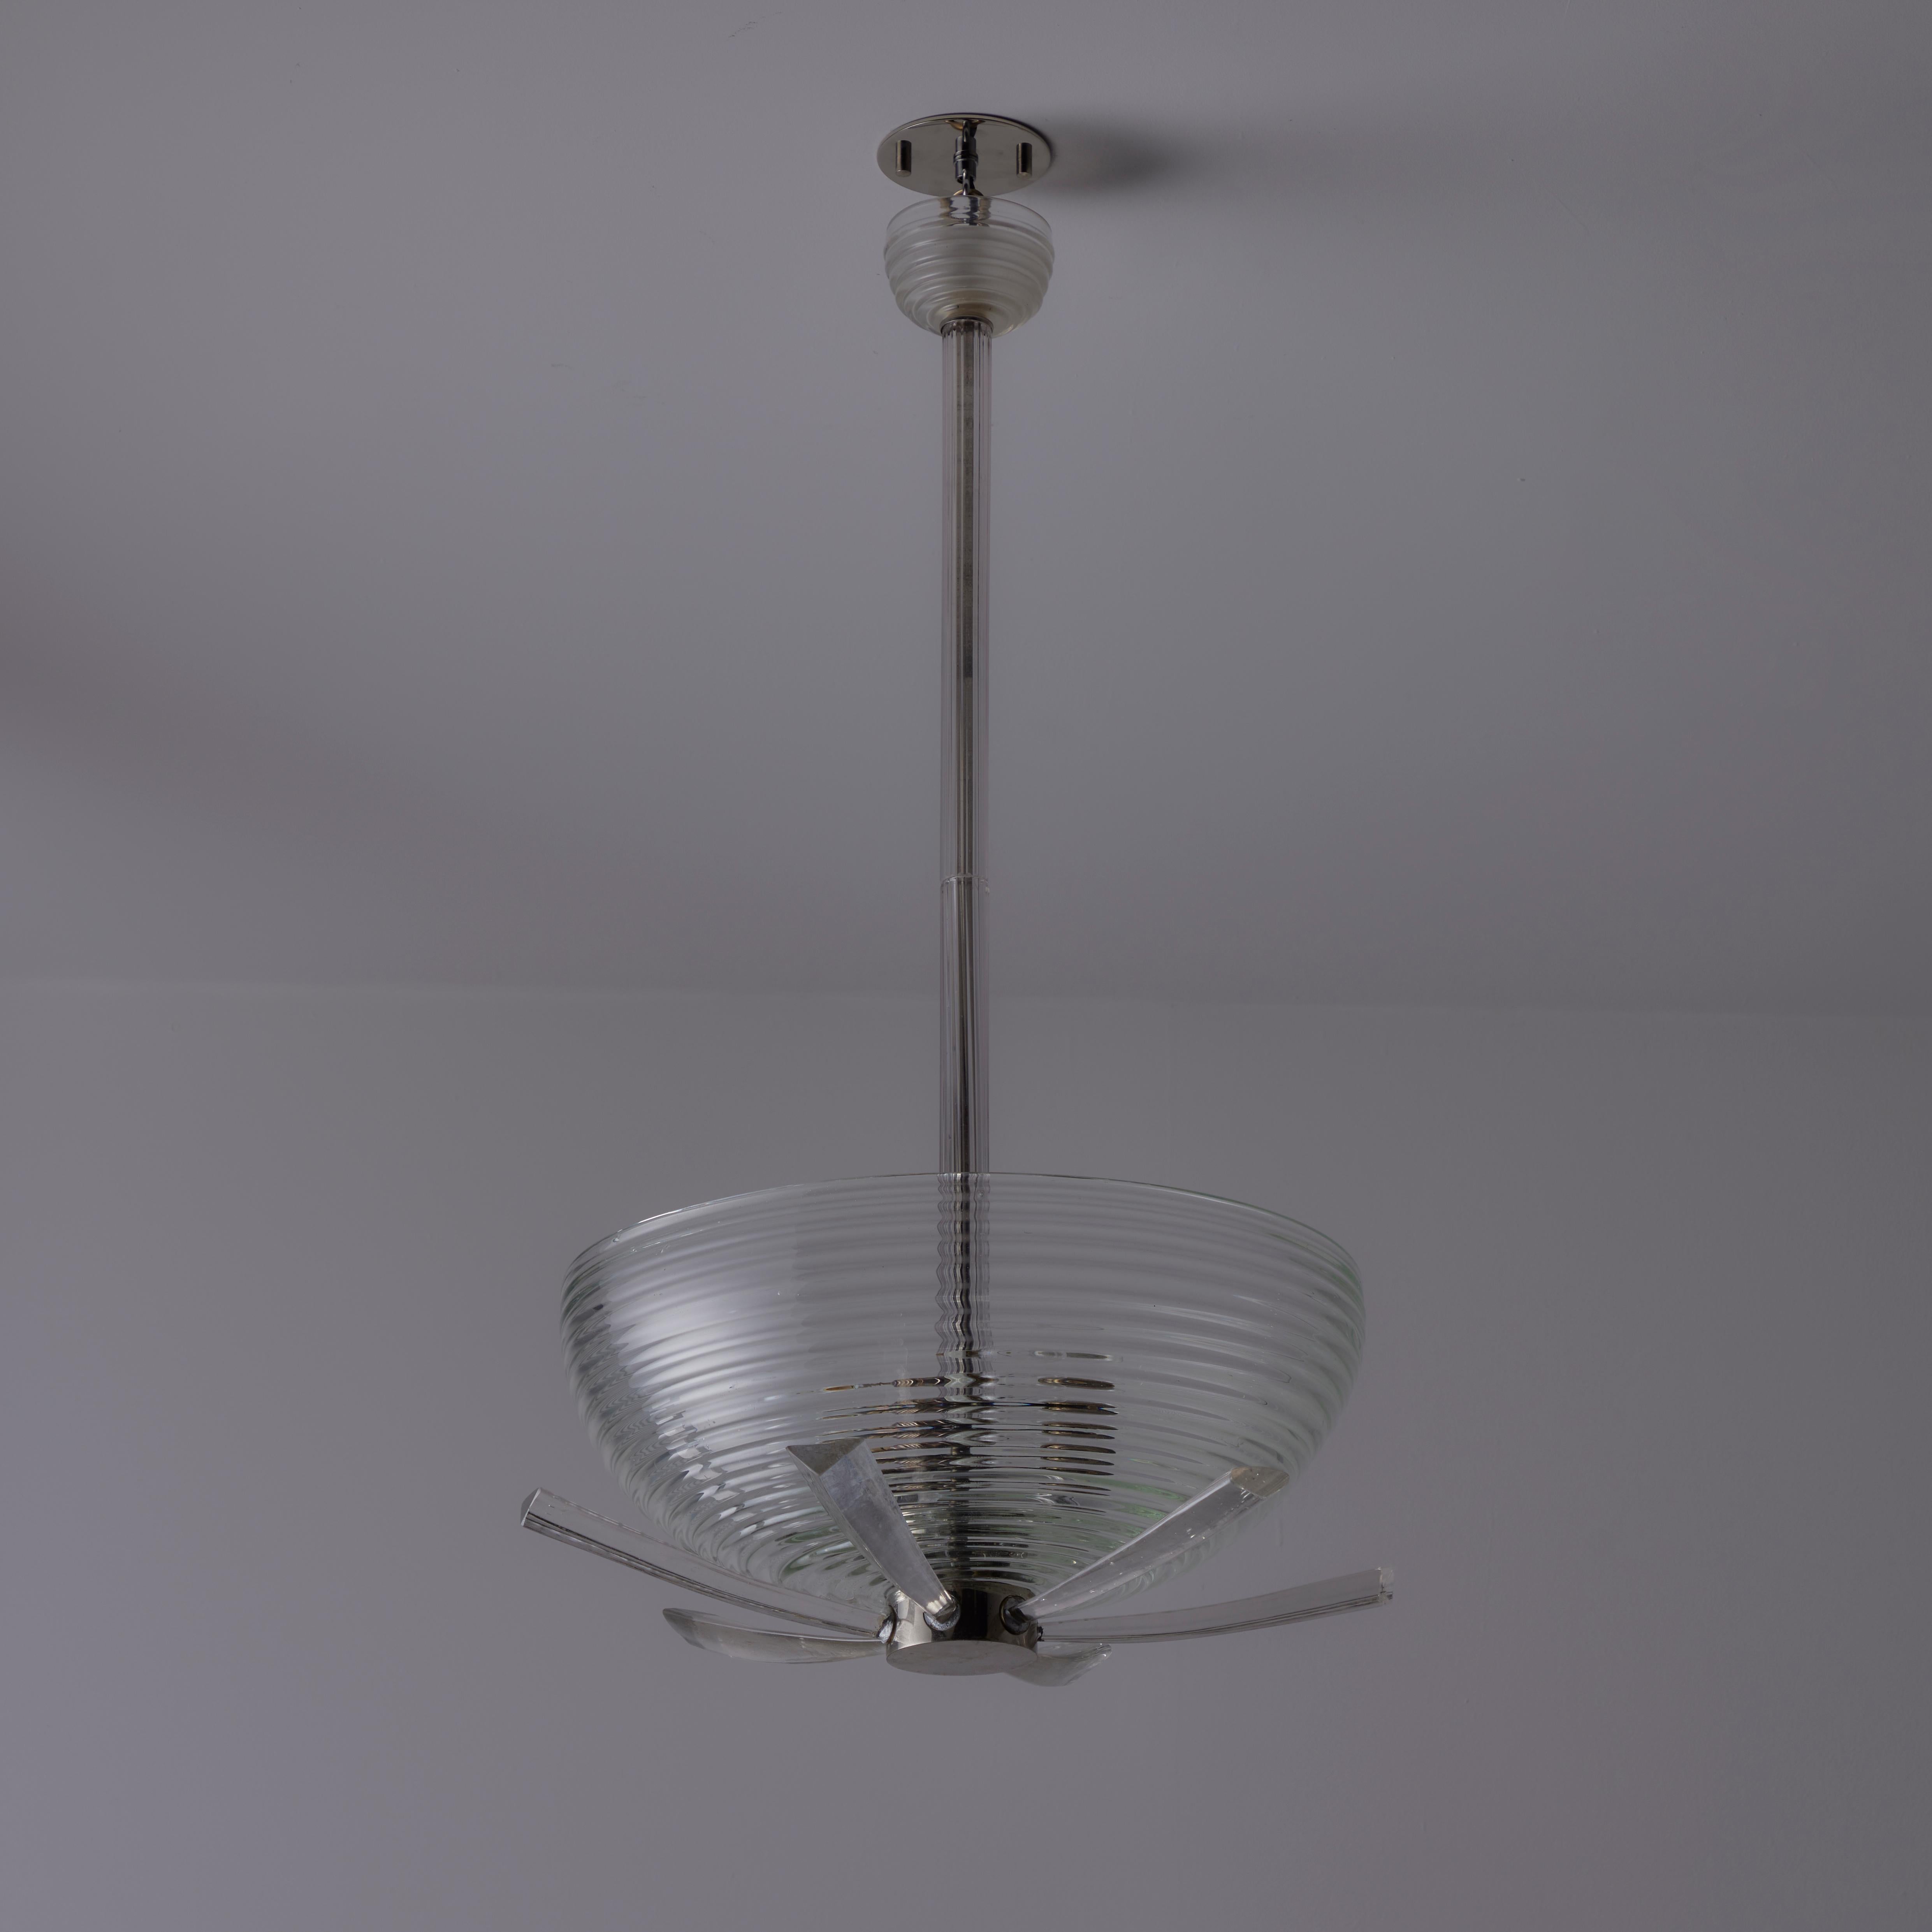 Mid-20th Century Ceiling Lights by Seguso